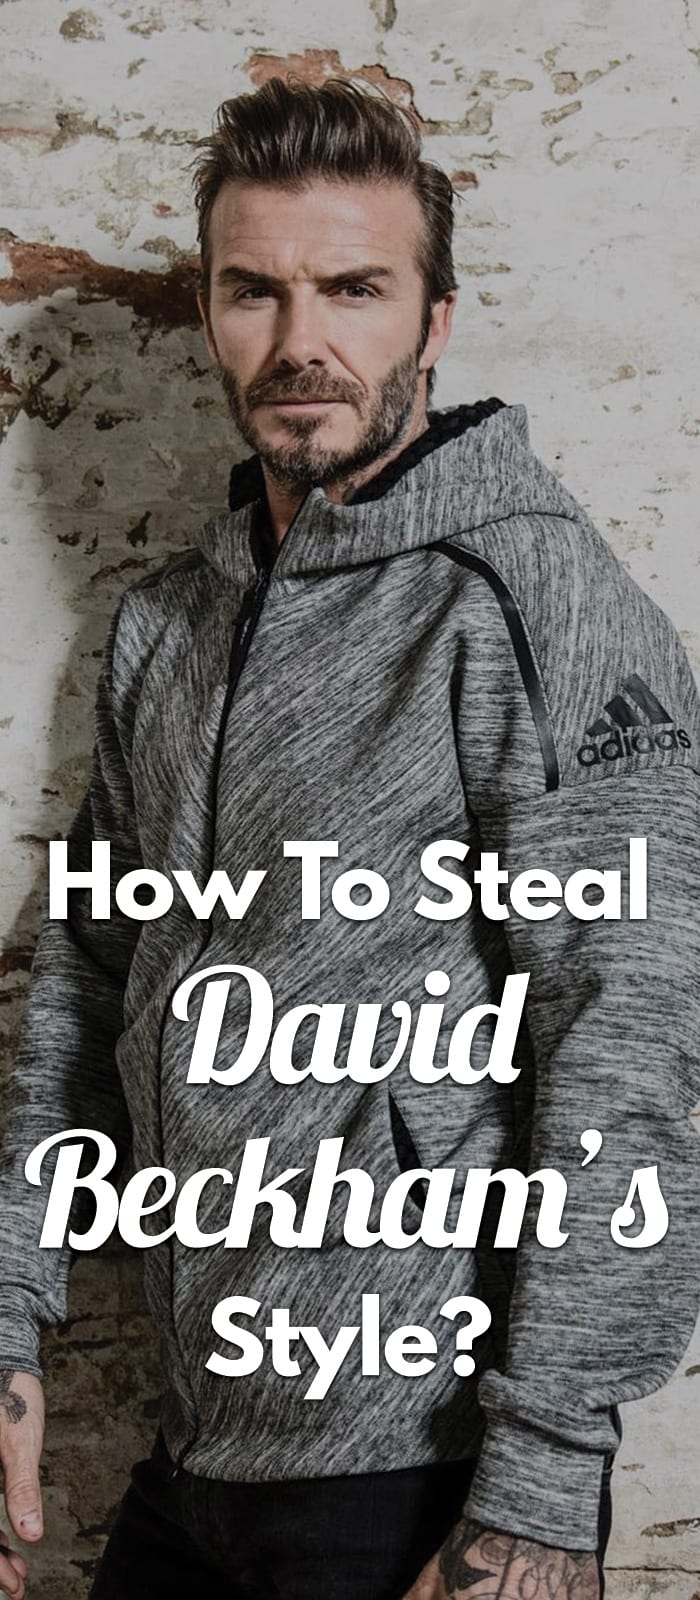 How-To-Steal-David-Beckham’s-Style